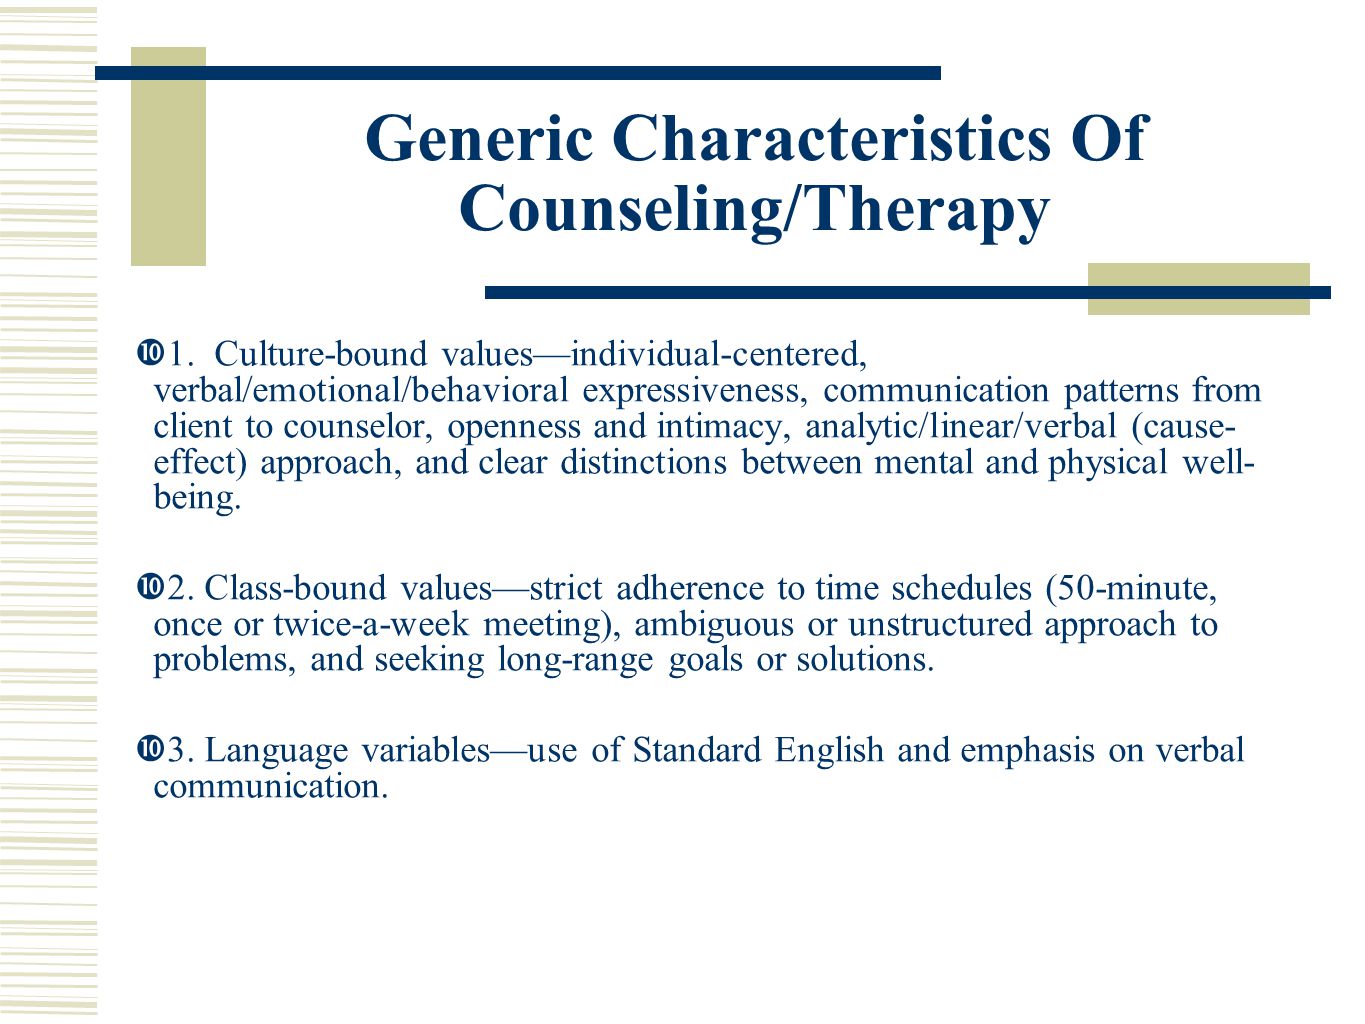 Counselors’ Understanding of Process Addiction: A Blind Spot in the Counseling Field